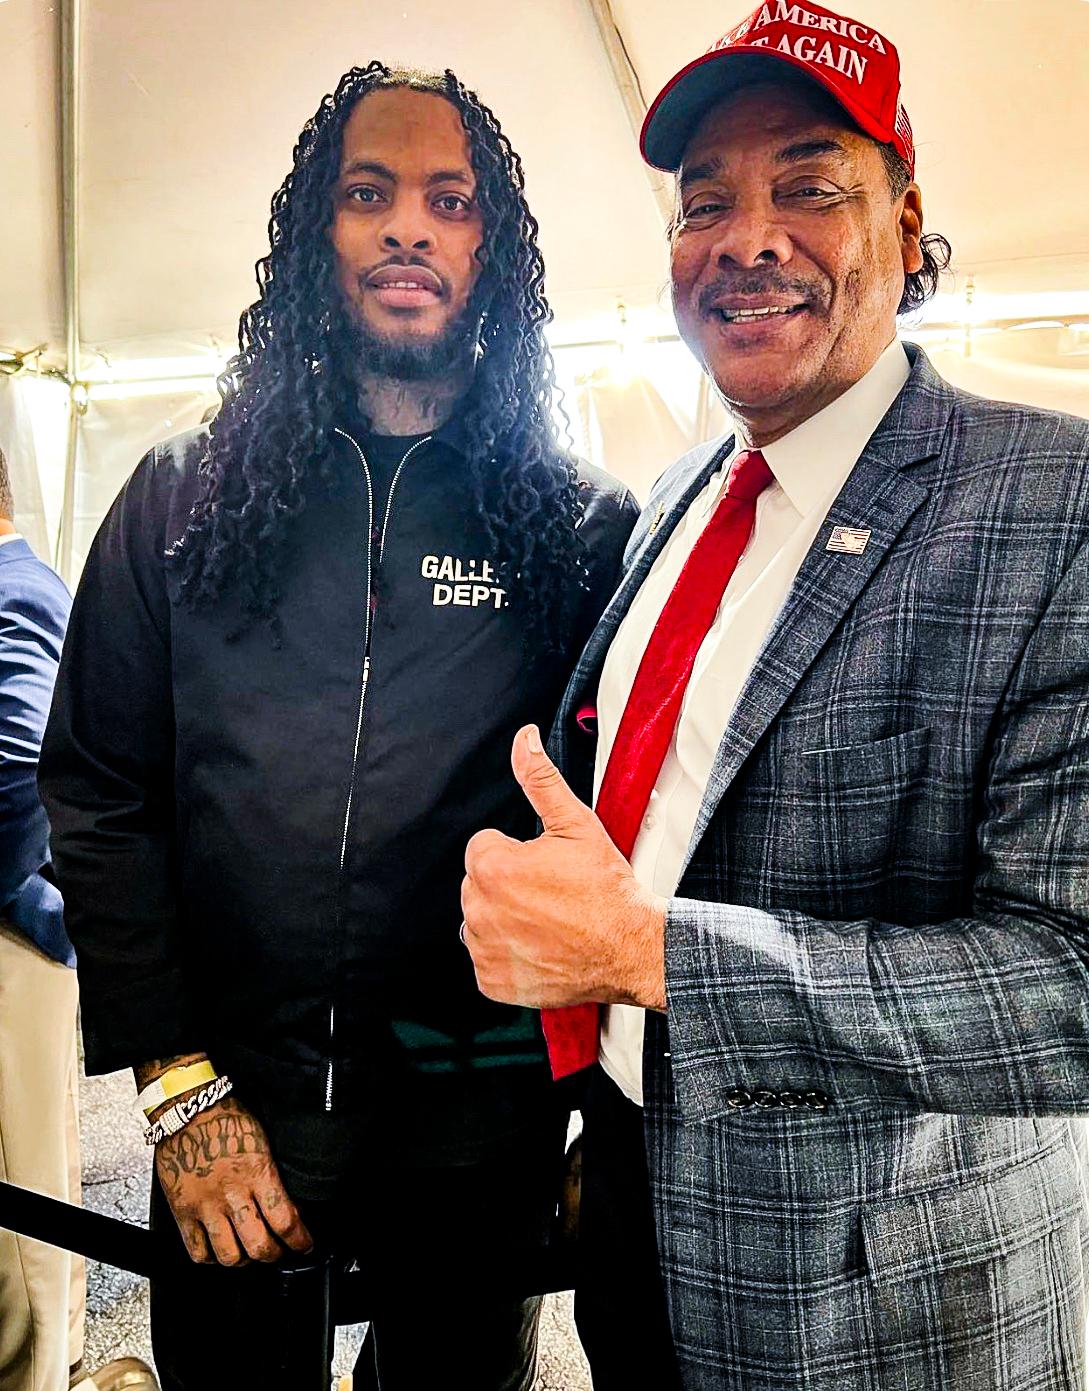 Rapper Waka Flocka Flame (L) and Bruce LeVell, an adviser to former President Donald Trump, pose for a photo in 2022. (Courtesy of Bruce LeVell)